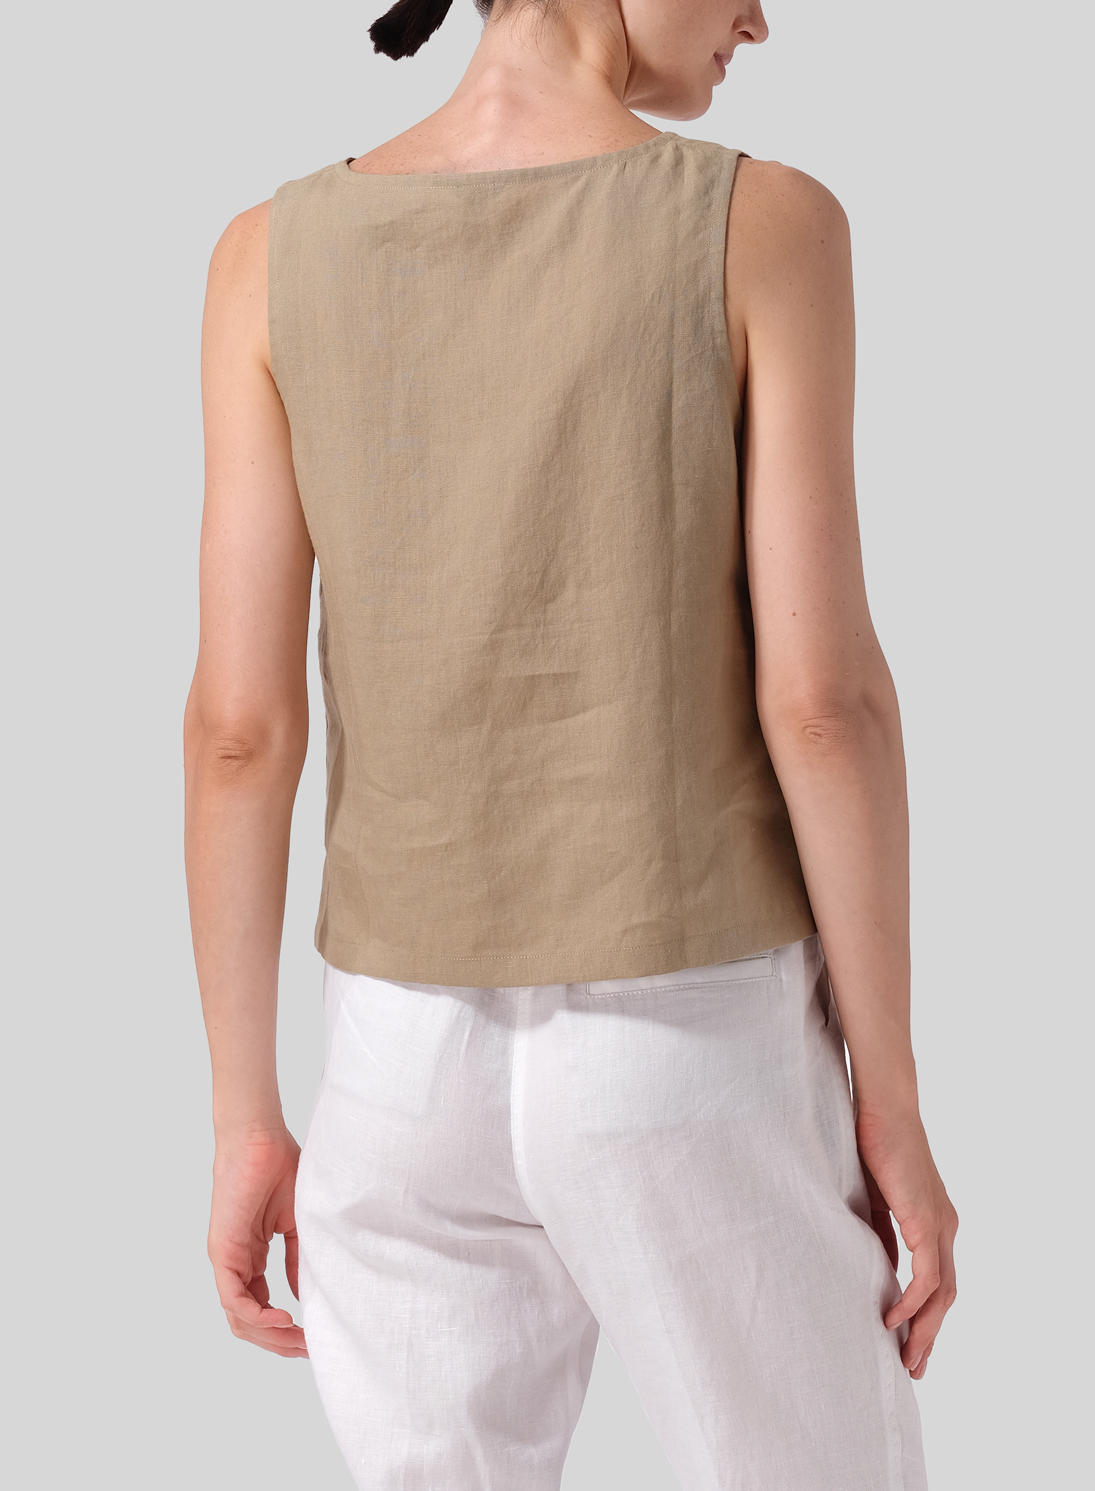 Linen Tank Top  Embodies the Entire Concept of You!